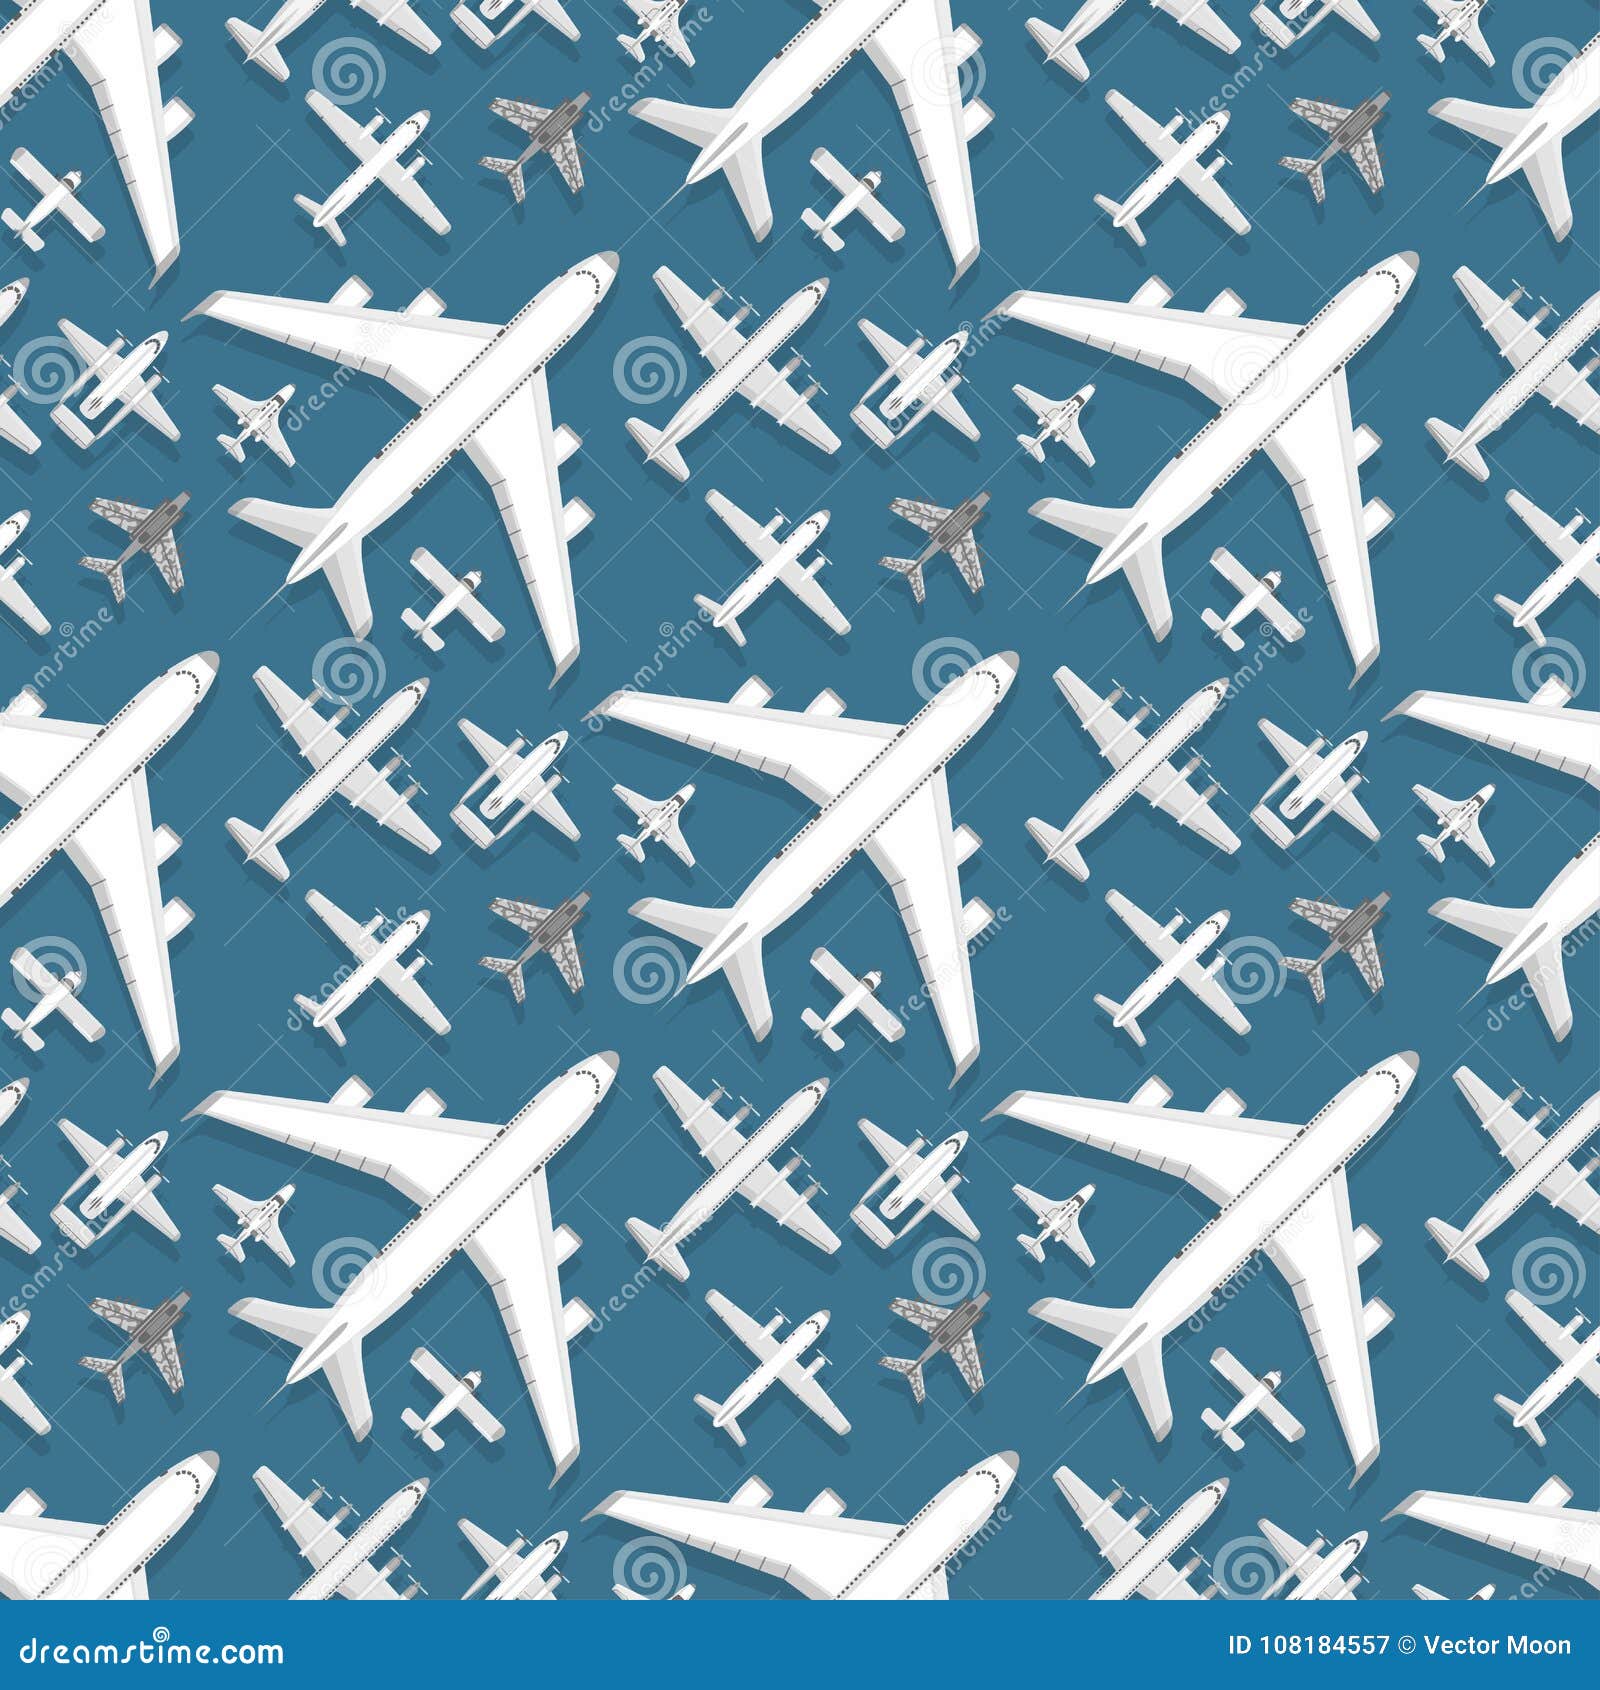 Airplane seamless pattern background vector illustration top view plane and aircraft transportation travel way design. Airplane seamless pattern background vector illustration plane top view passenger trip and aircraft transportation travel way to vacation sky design journey international plane.